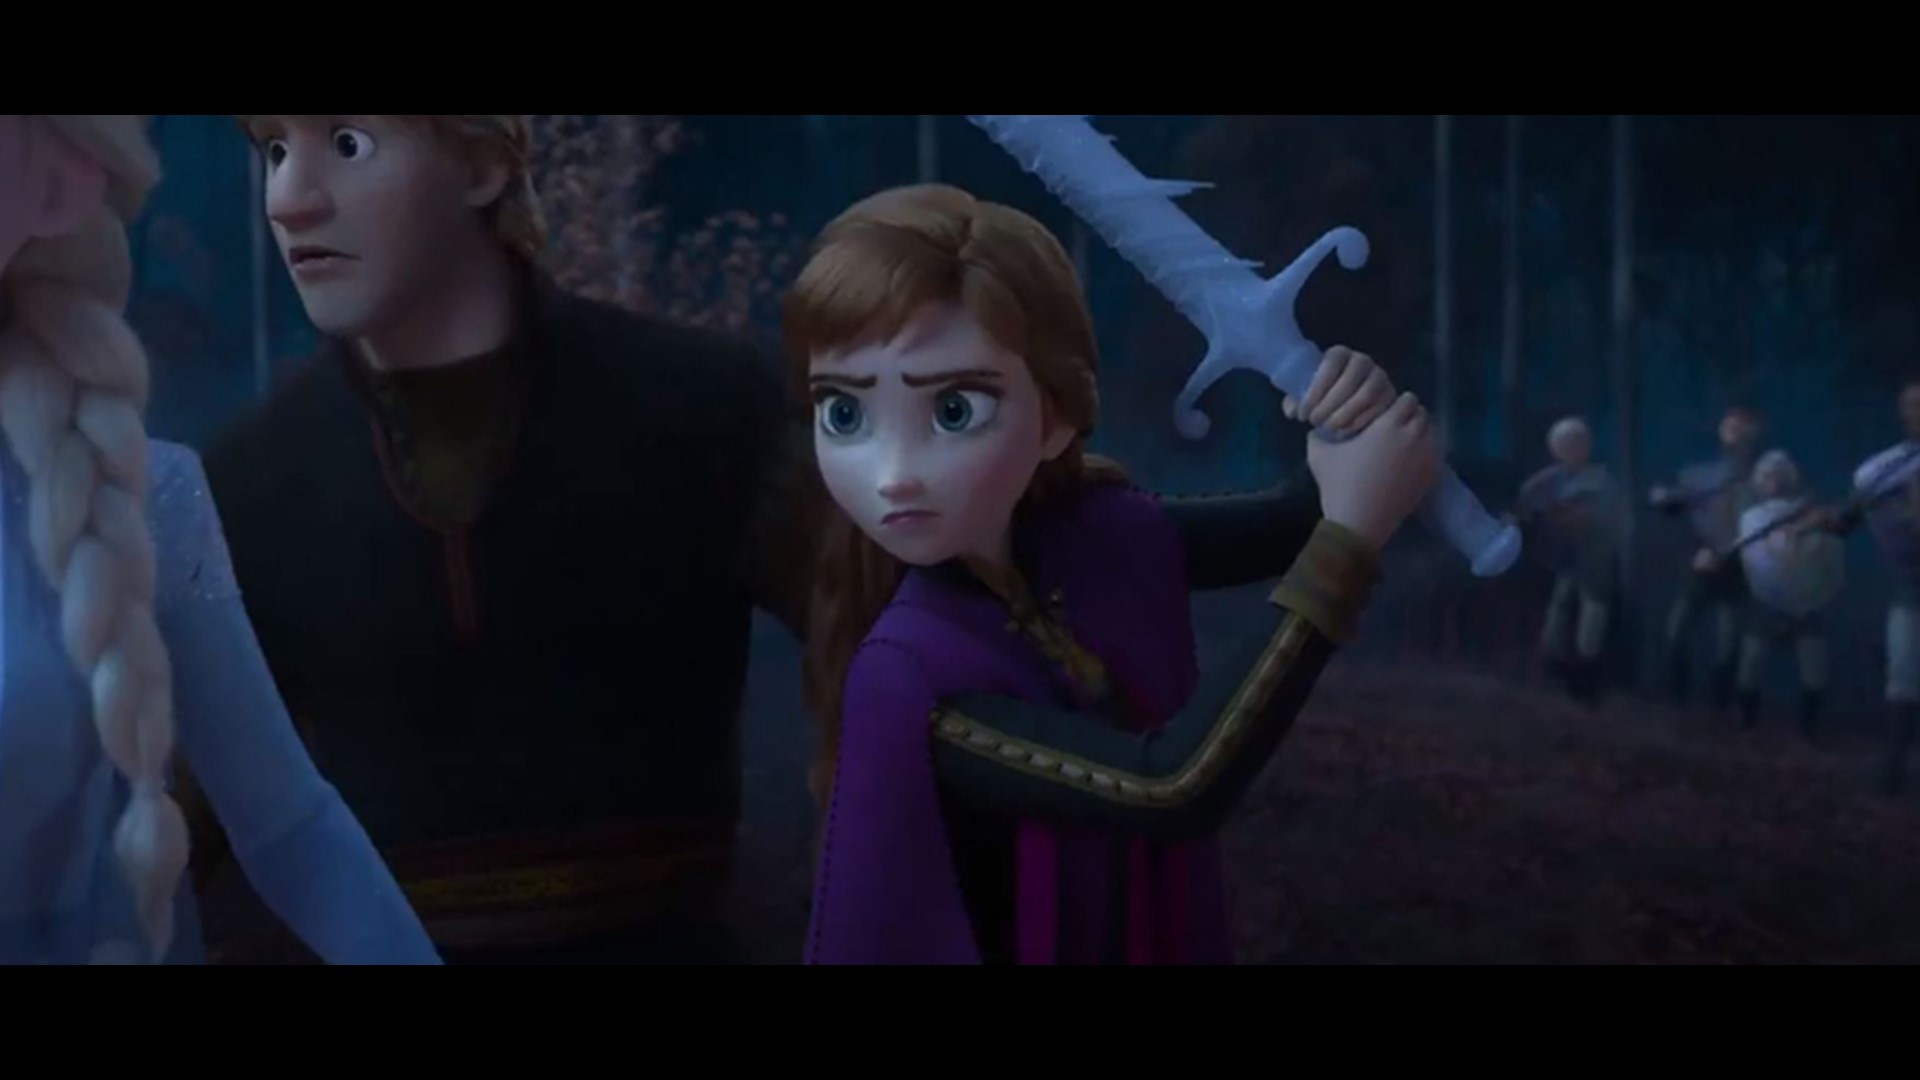 New Frozen 2 Trailer Reveals More Of The Plot Behind The Film 8768